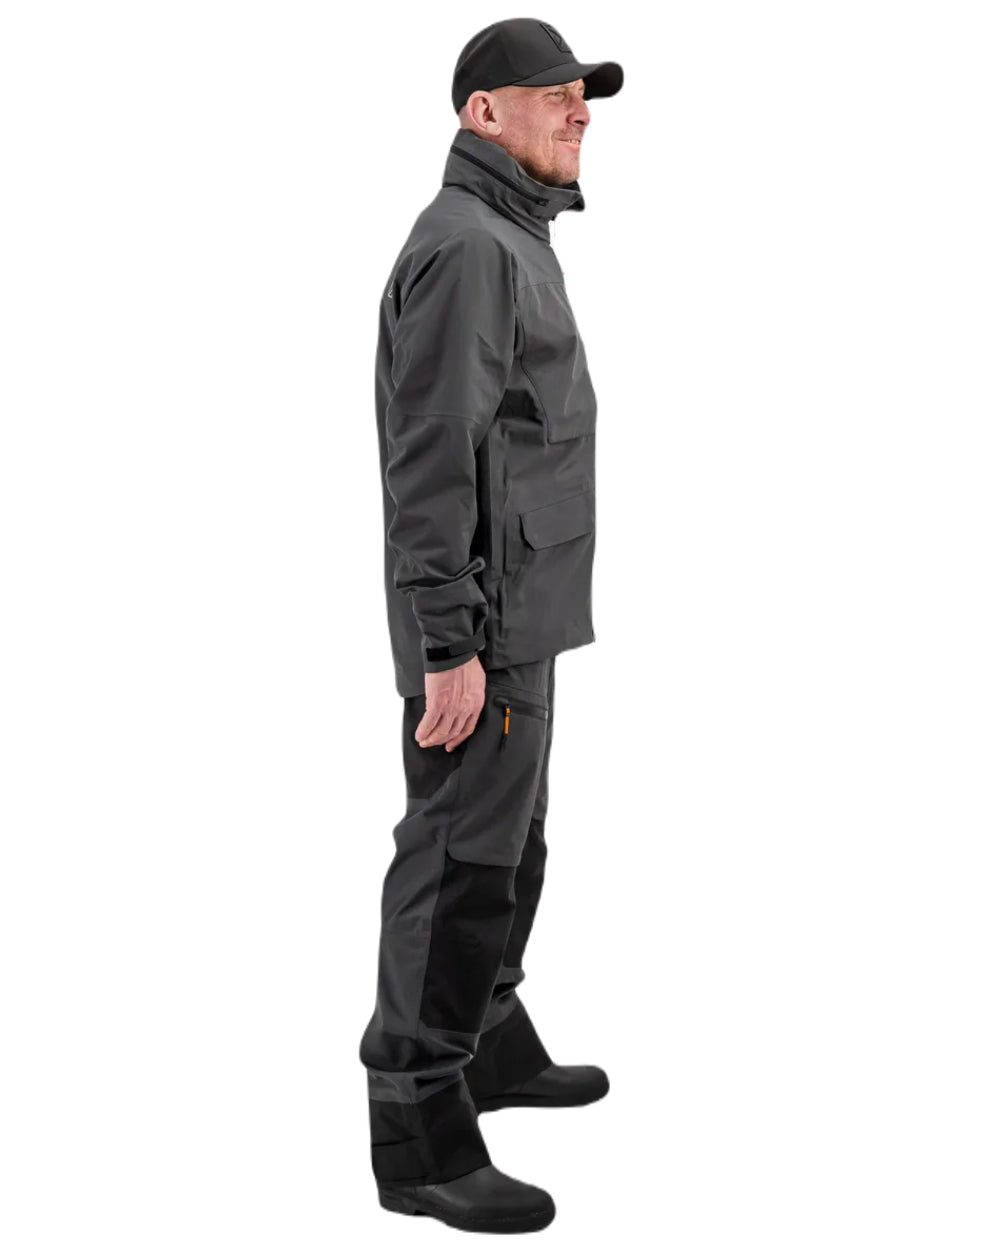 Coal Black Coloured Didriksons Fractus Jacket On A White Background